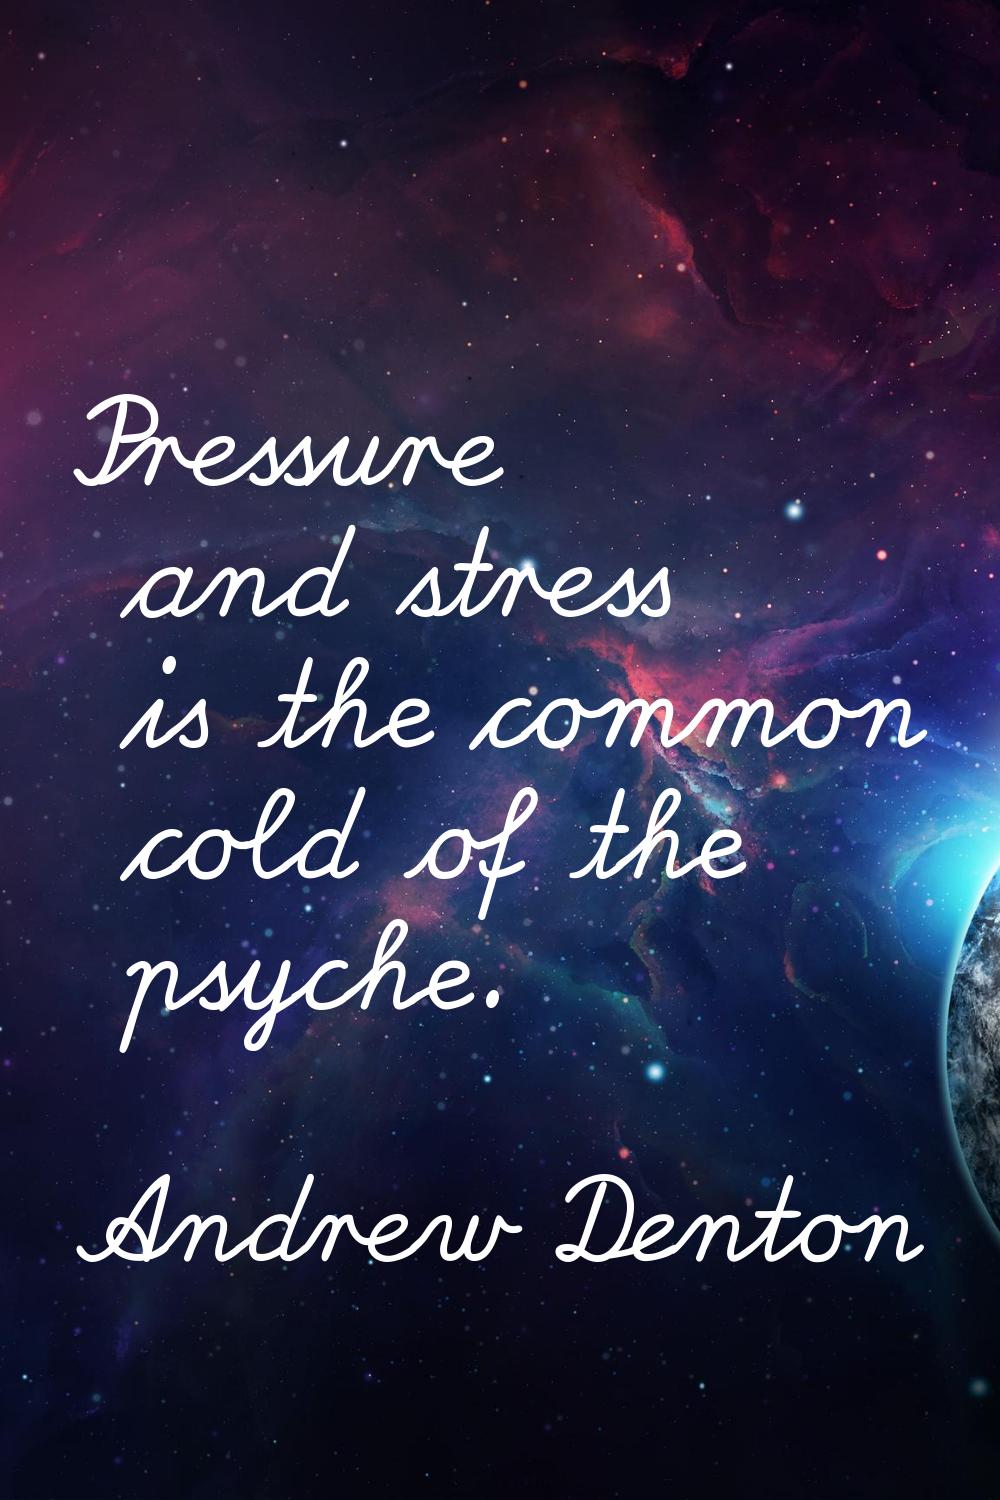 Pressure and stress is the common cold of the psyche.